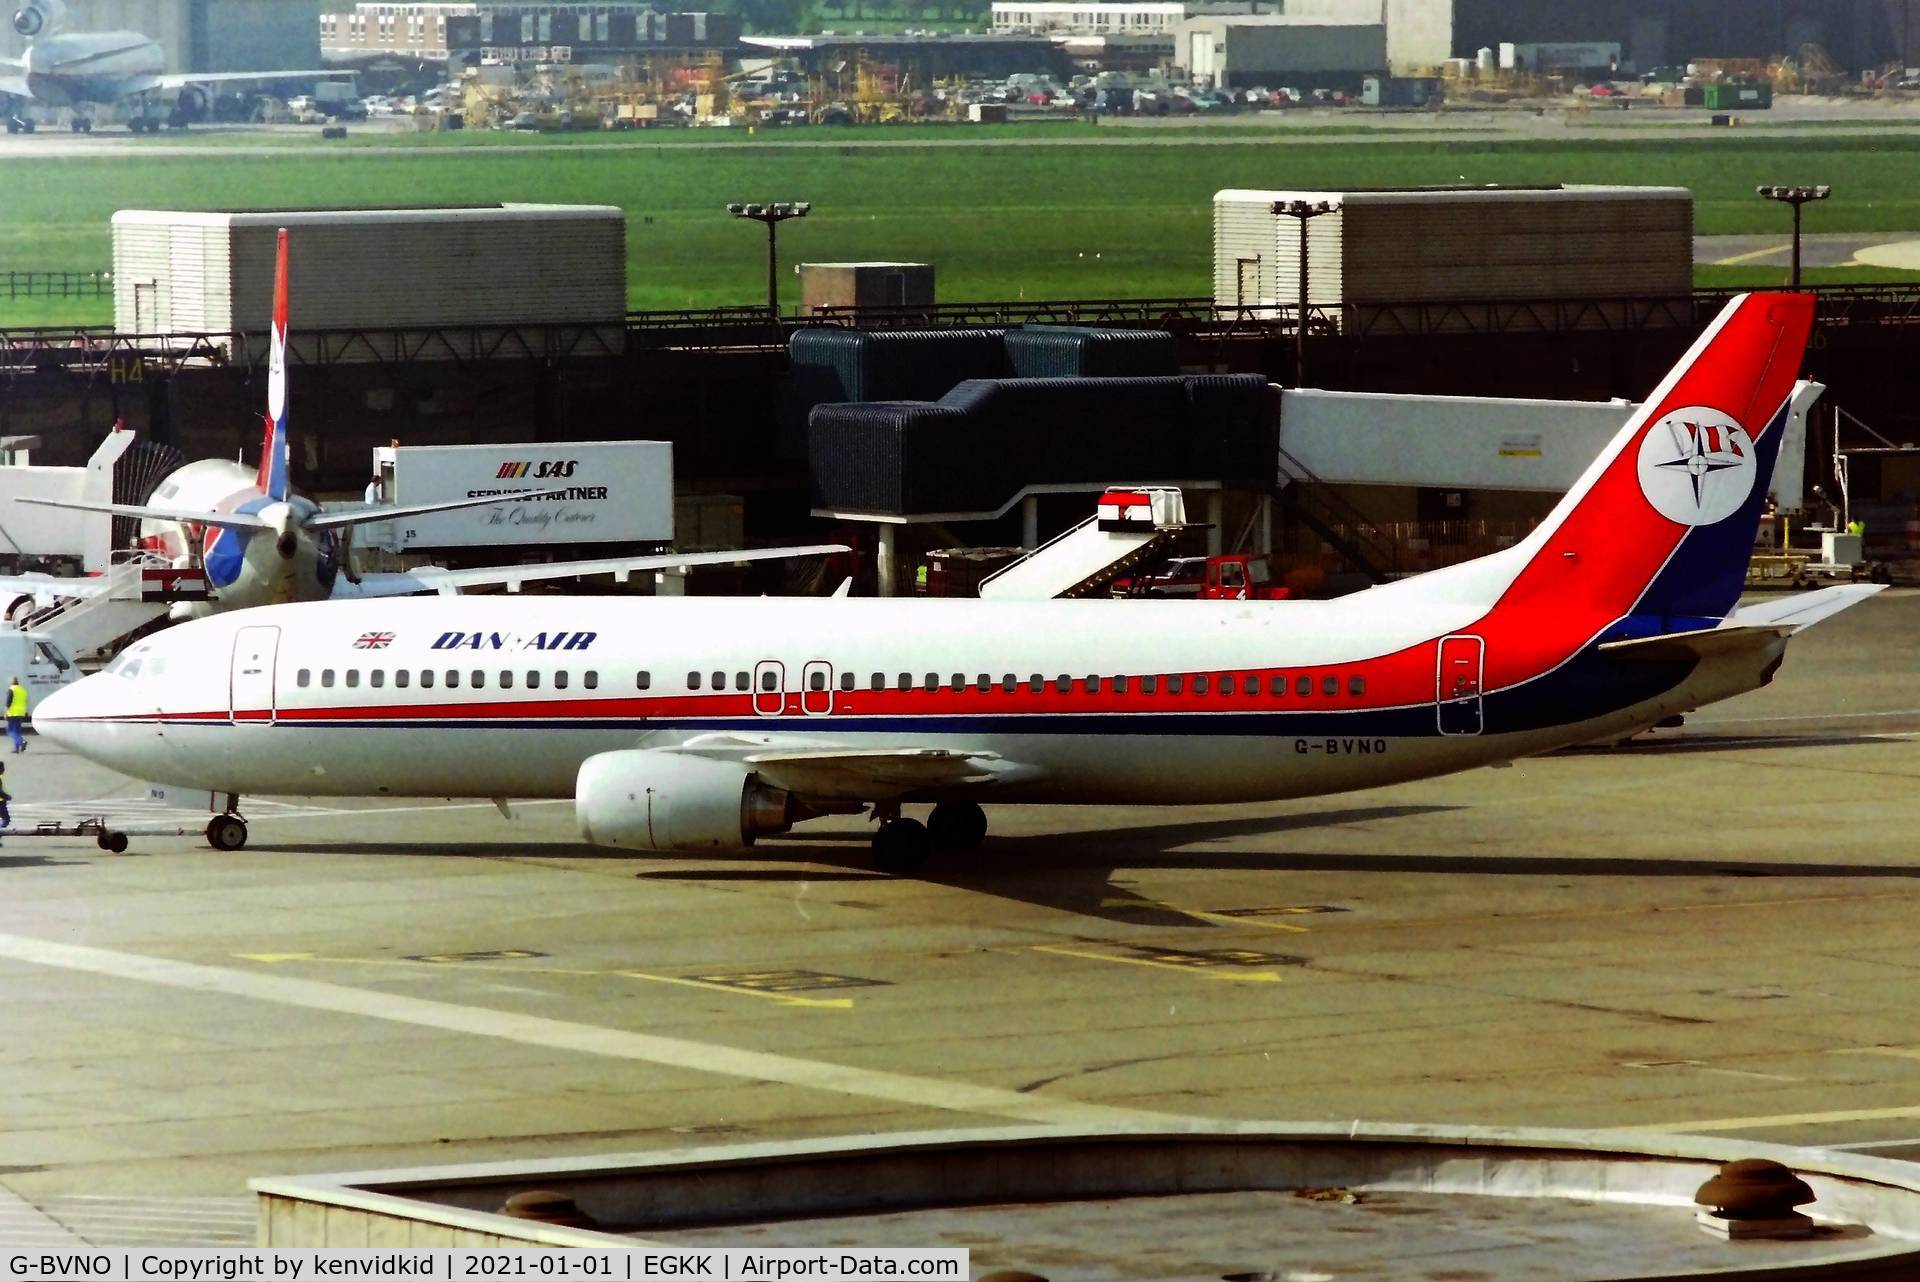 G-BVNO, 1989 Boeing 737-4S3 C/N 24167, At London Gatwick early 1992.